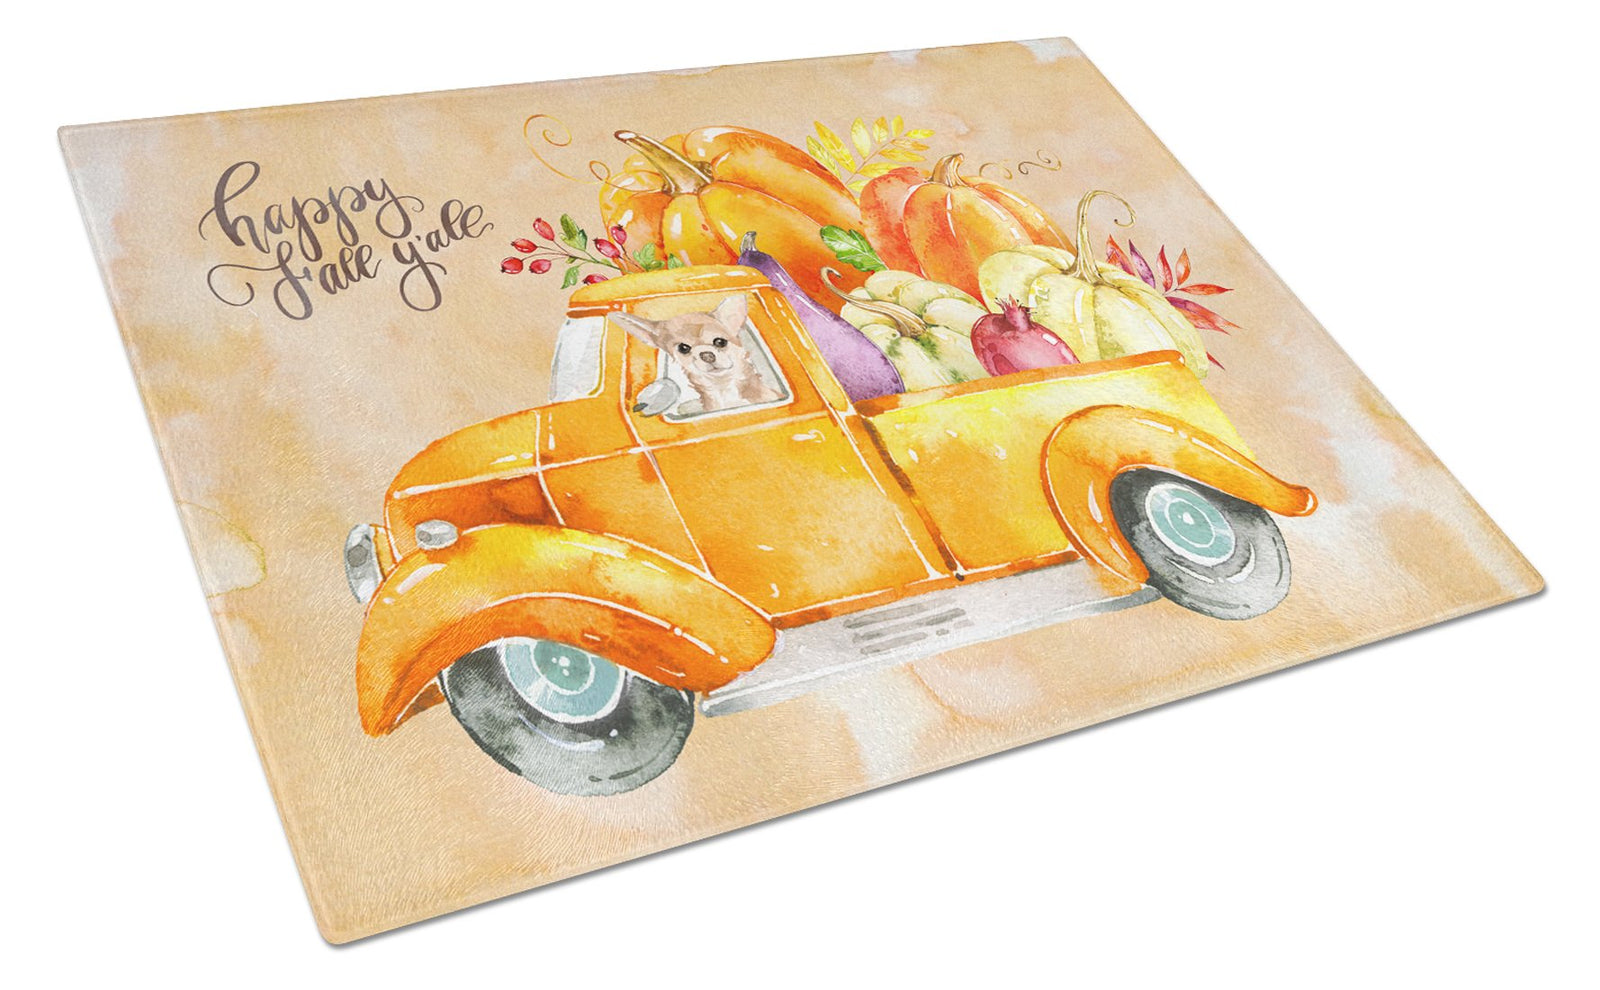 Fall Harvest Chihuahua Glass Cutting Board Large CK2661LCB by Caroline's Treasures